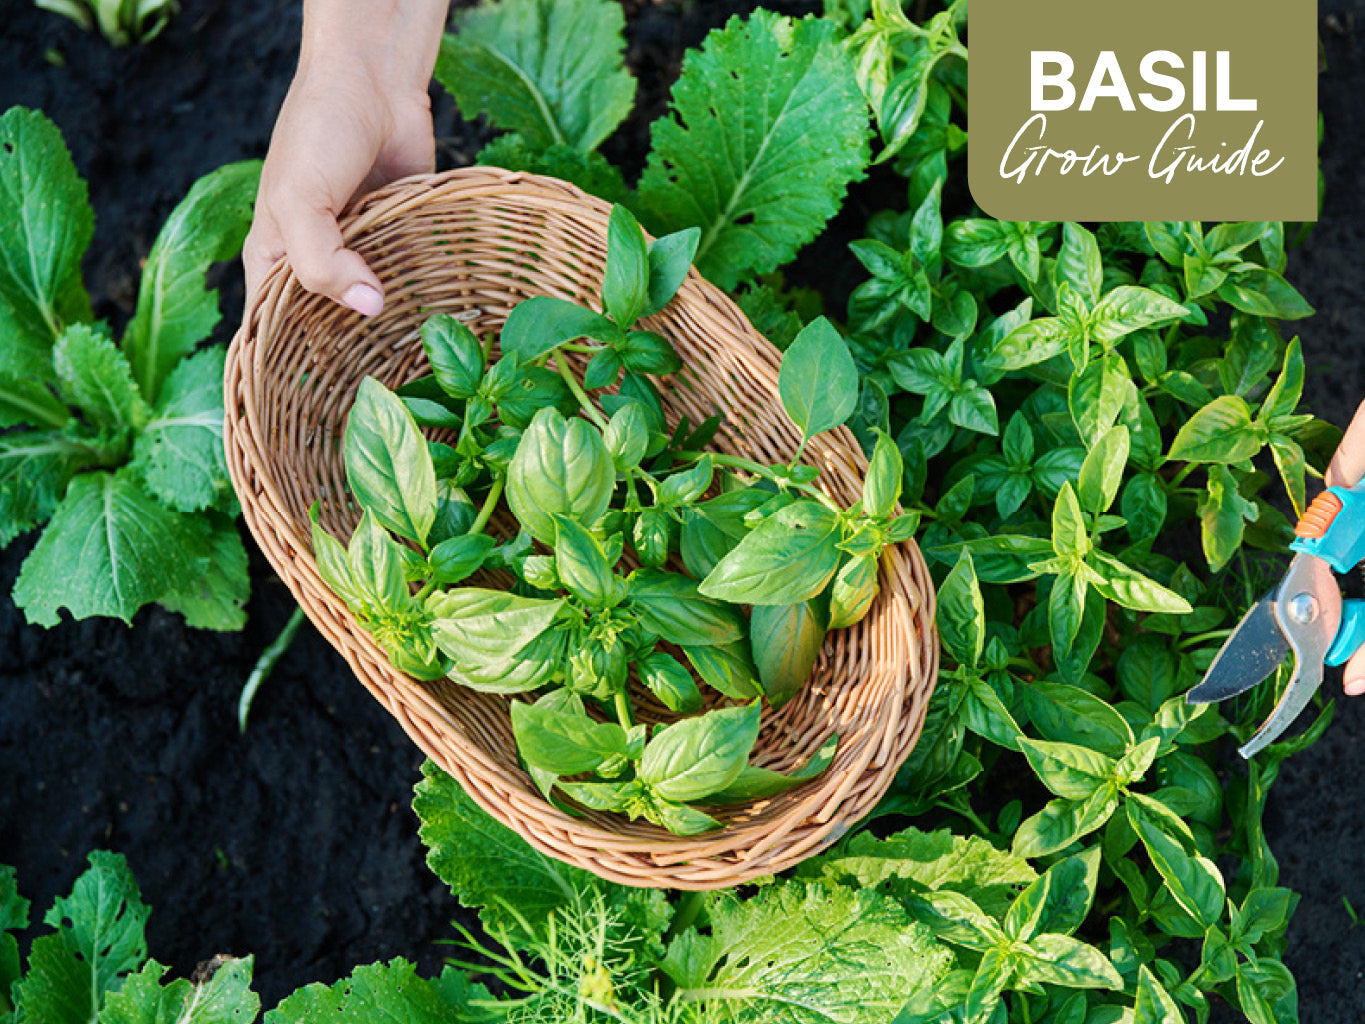 Basil Grow Guide: How to Plant, Grow and Harvest Basil